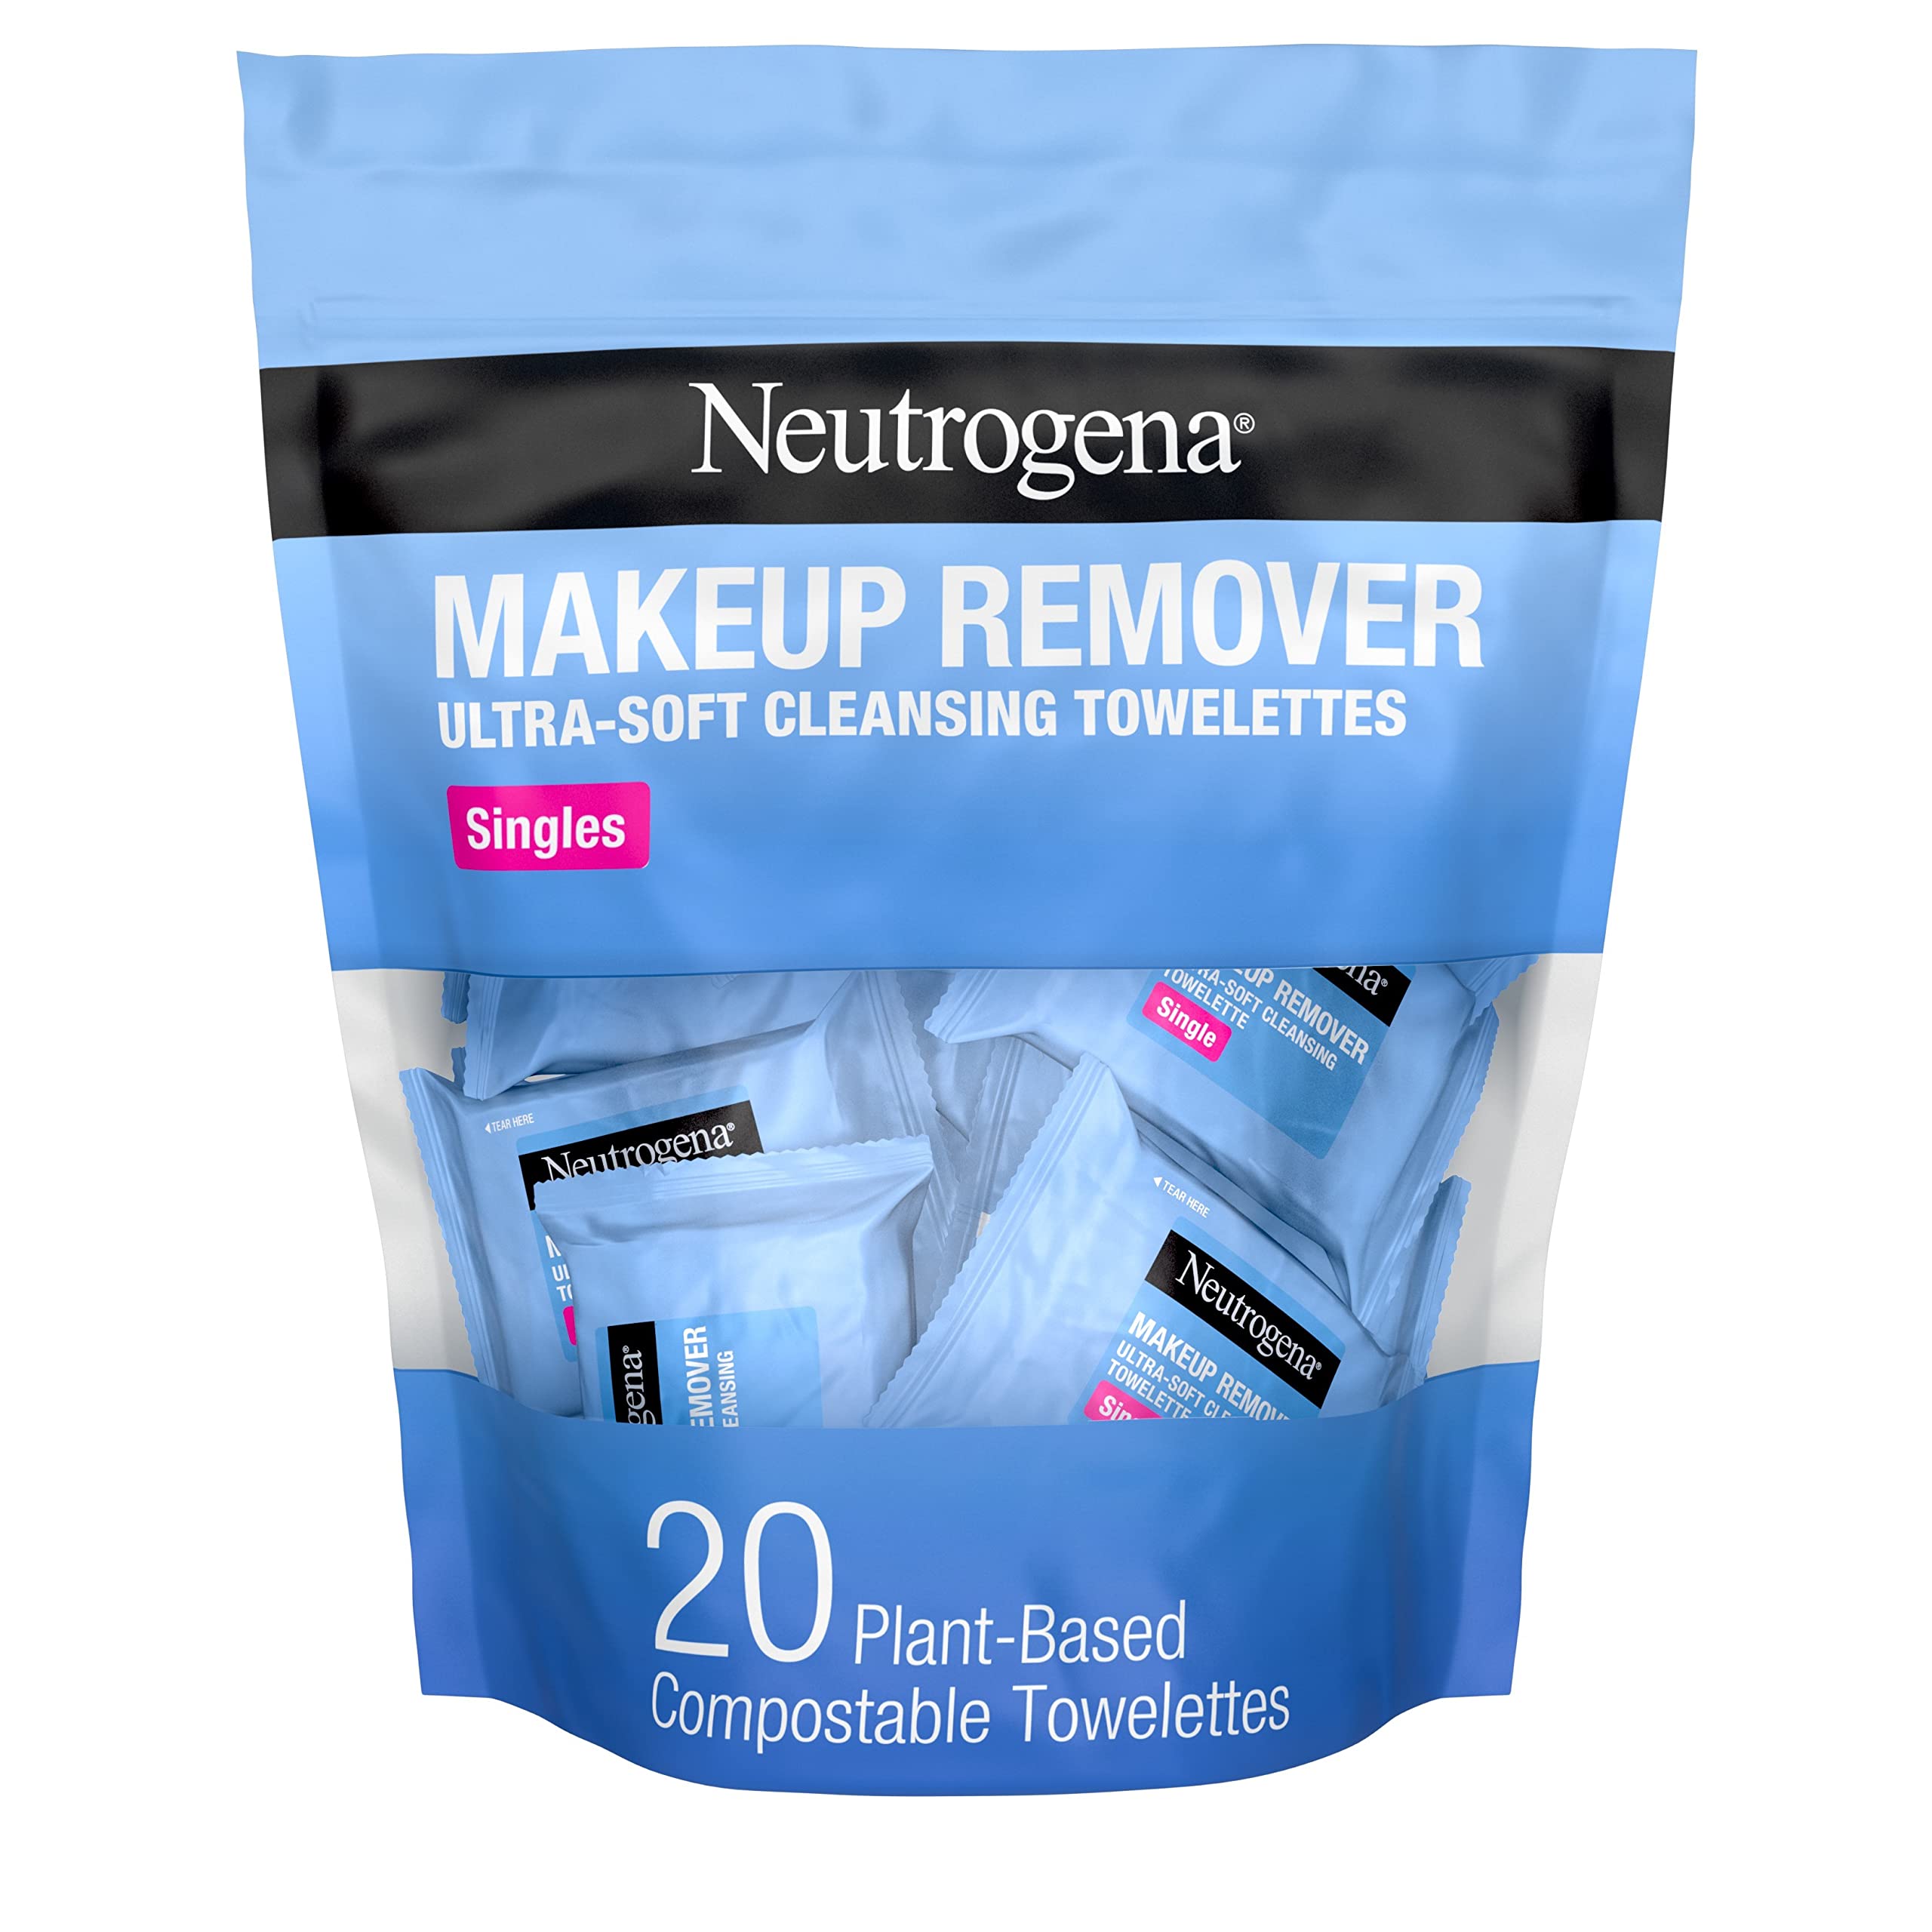 20-Ct Neutrogena Makeup Remover Facial Cleansing Towelette Singles Individually Wrapped $5.20 (.26c Ea) w/ S&S + Free Shipping w/ Prime or on orders over $25